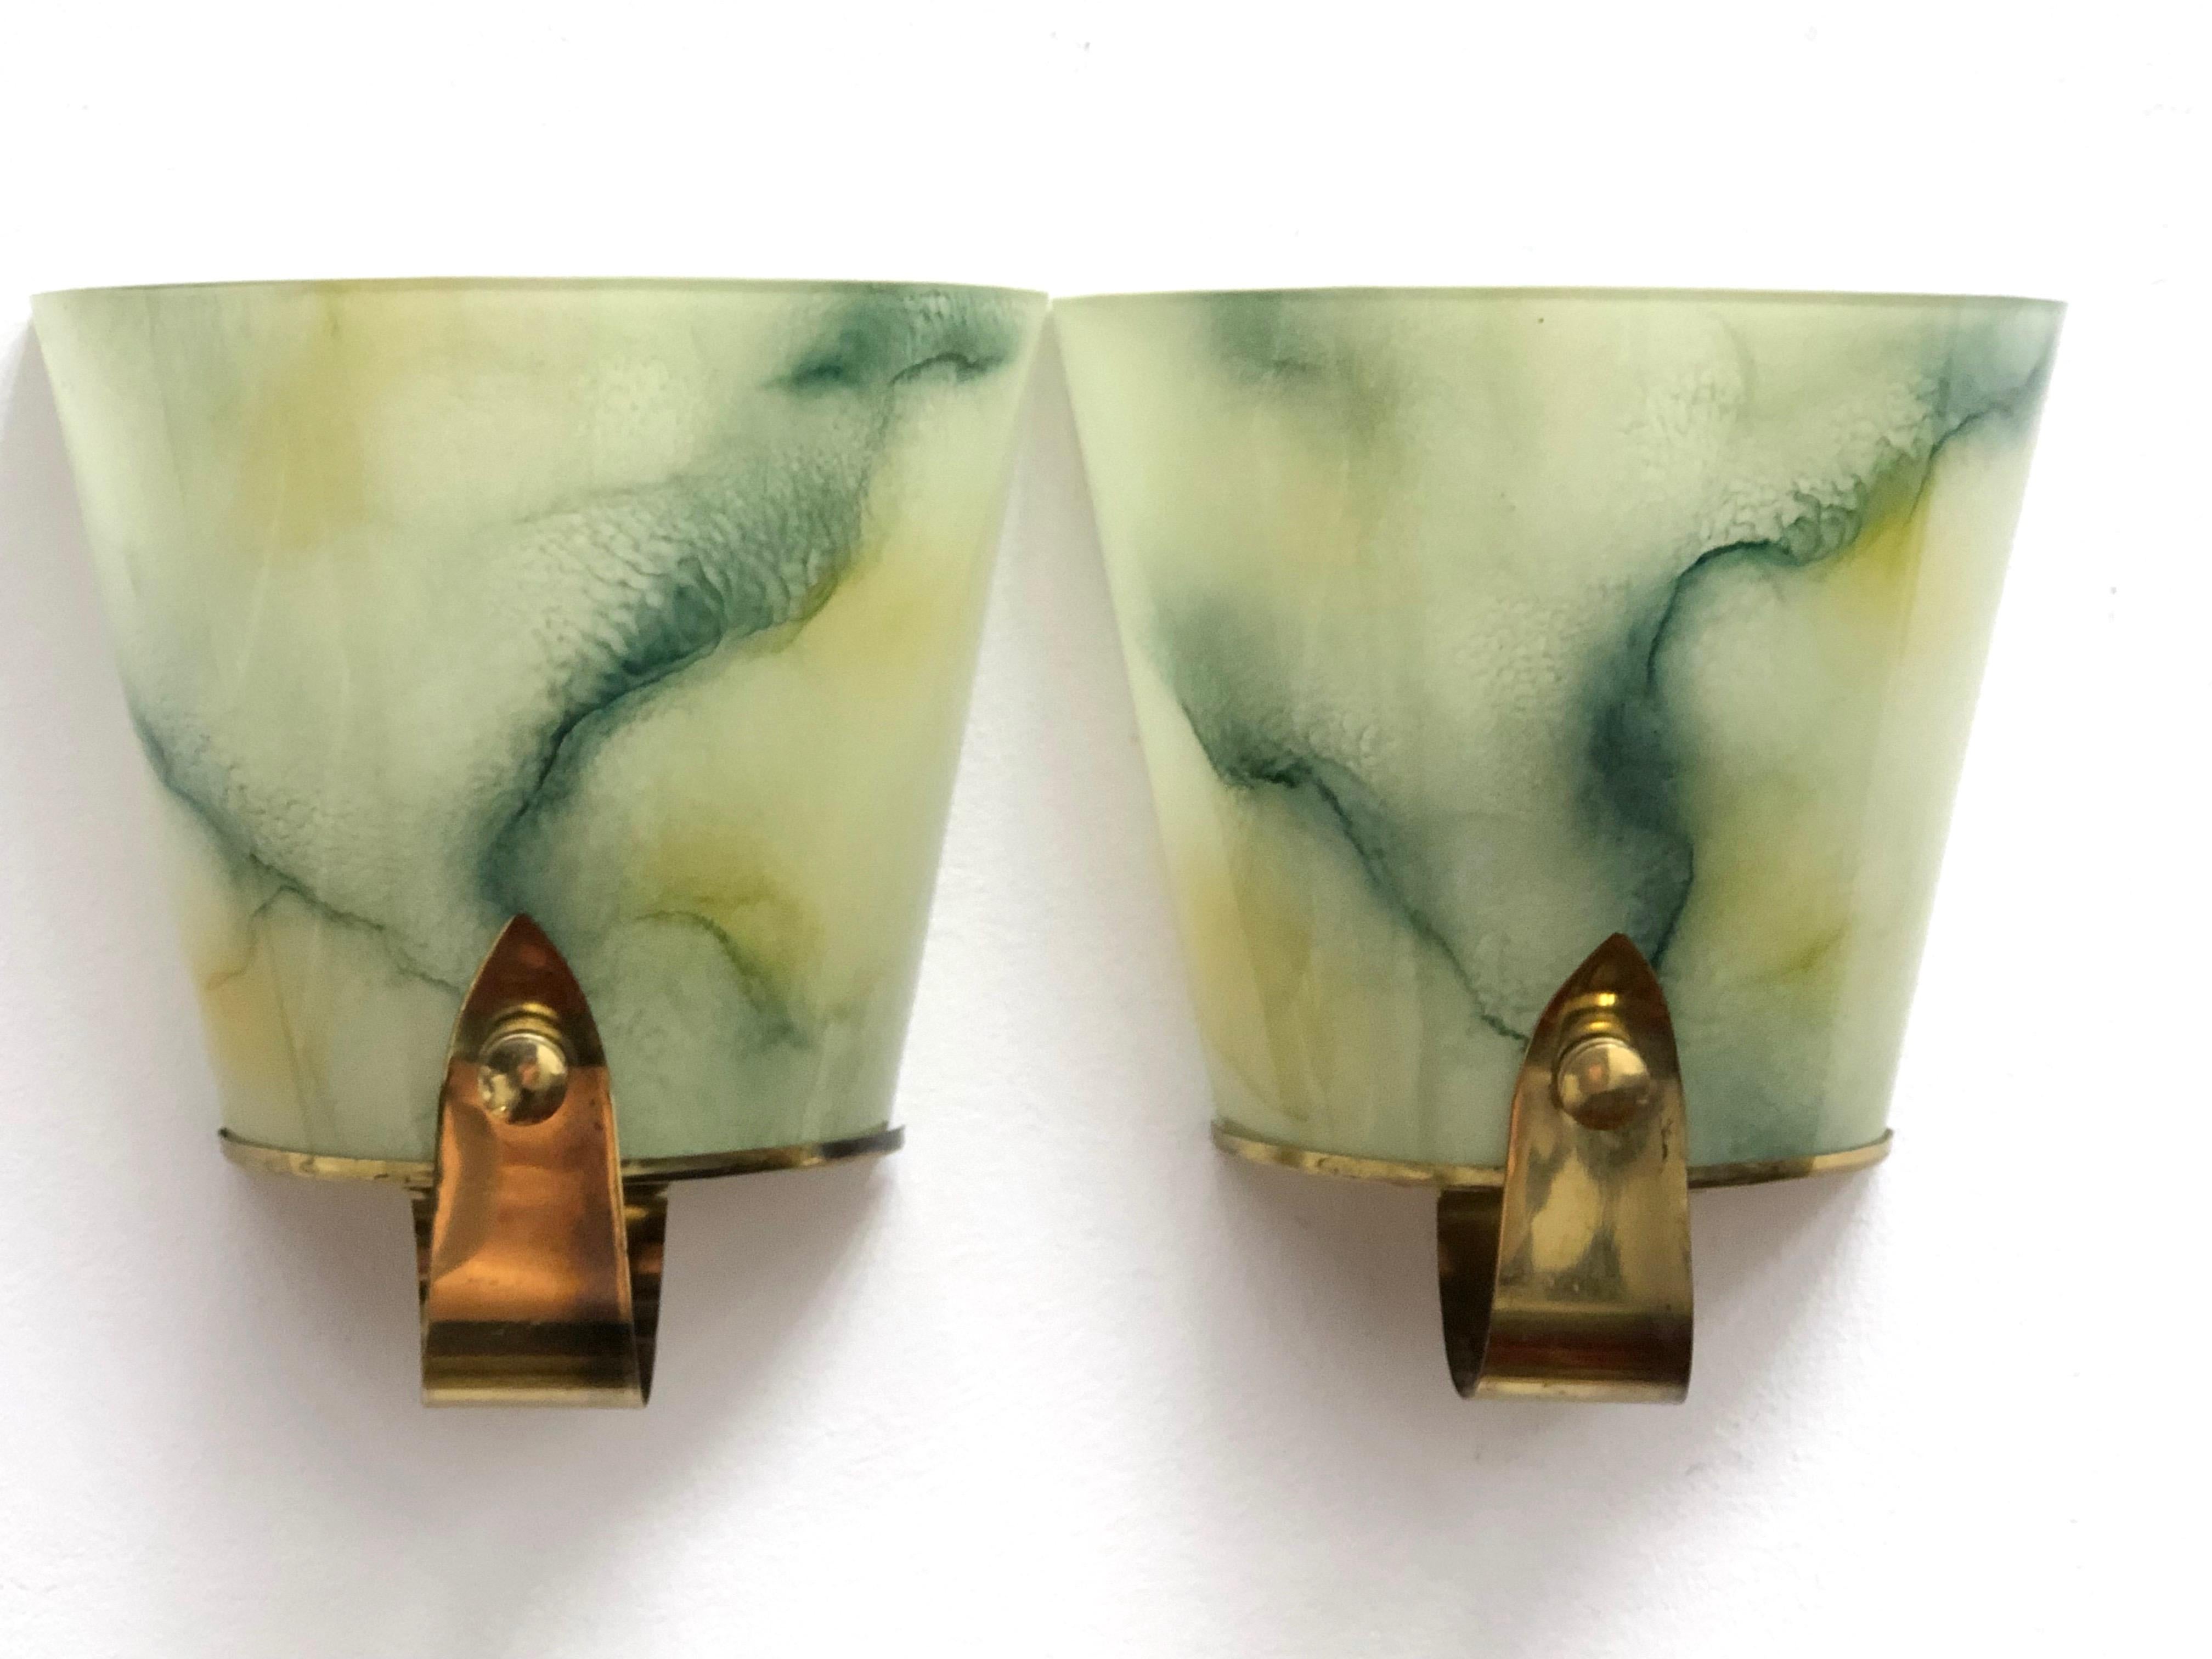 Pair of Art Deco sconces. Beautiful marble style glass on a brass frame. The fixture requires one European E27 / 110 Volt Edison bulbs, each bulb up to 75 watts.